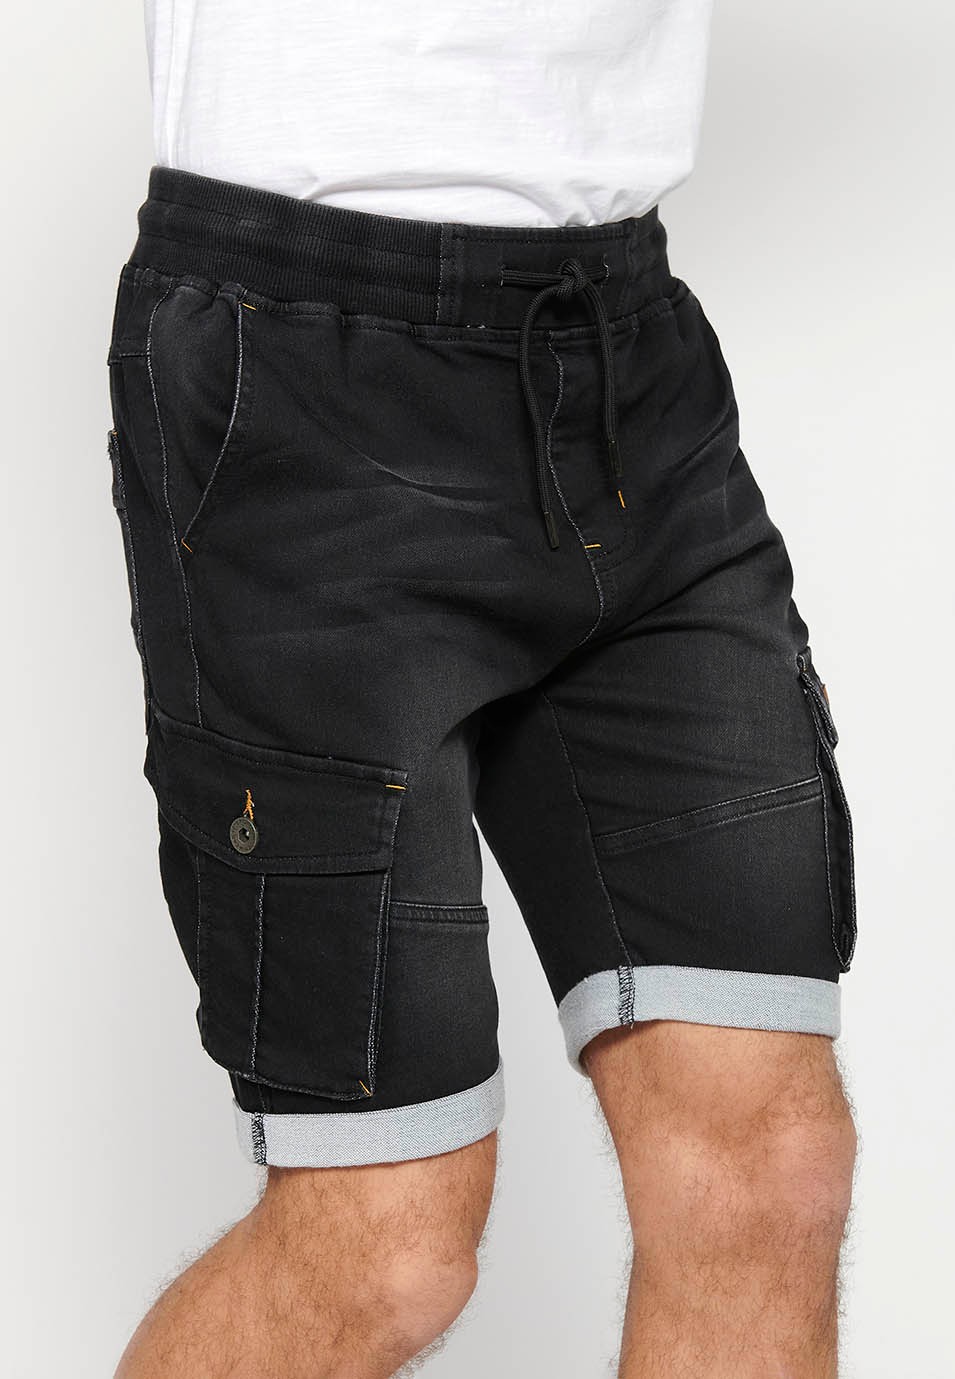 Denim Bermuda cargo jogger shorts finished with a turn-up, Adjustable waist with elastic and drawstring, Side pockets with flap, Black for Men 4